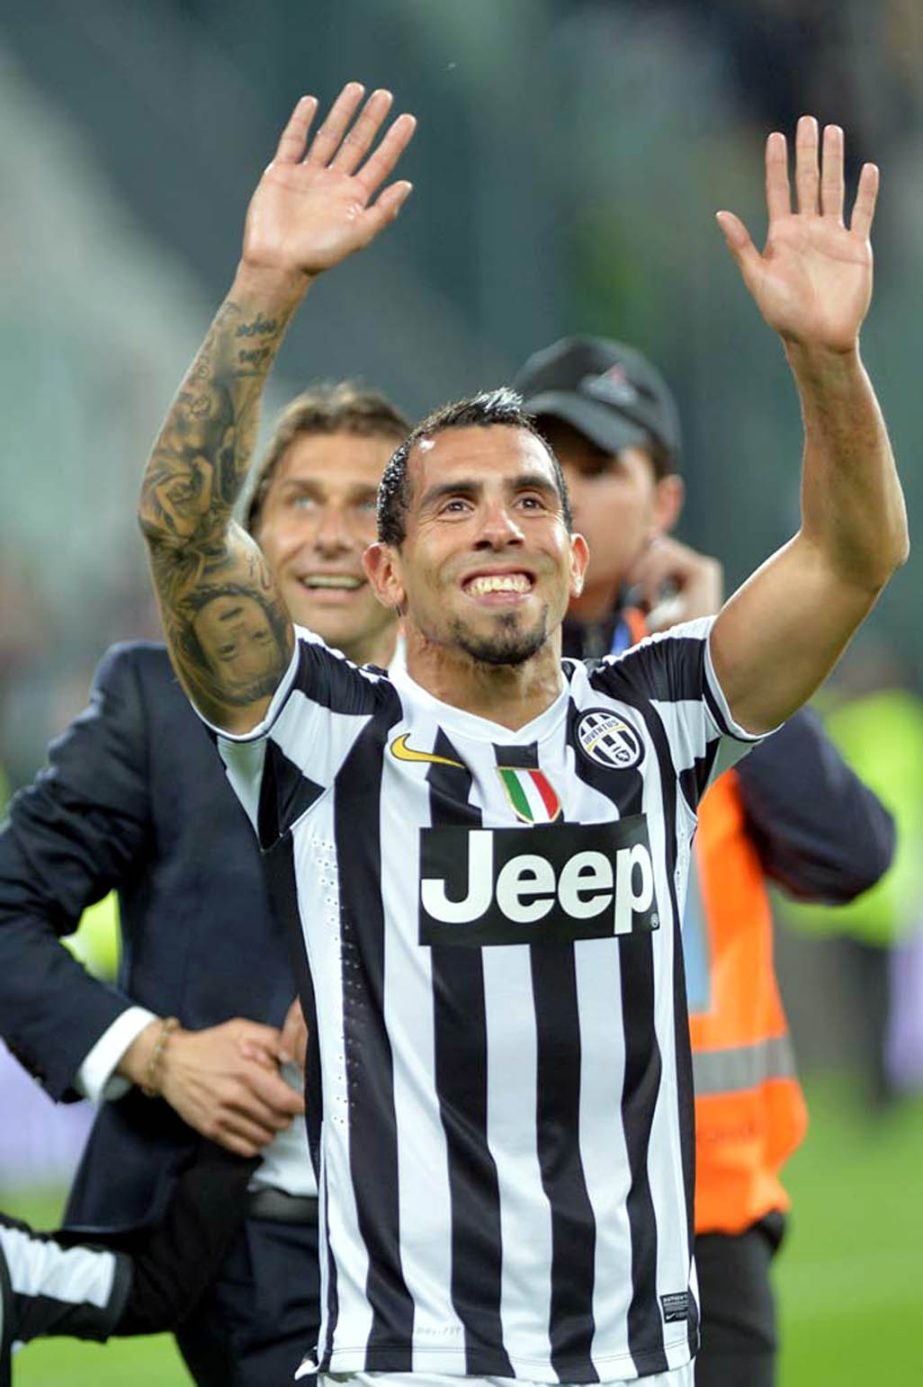 Juventus' Carlos Tevez celebrates at the end of a Serie A soccer match againsts Atalanta at the Juventus stadium in Turin Italy. Juventus clinched its third straight and 30th overall Serie A title on Monday.